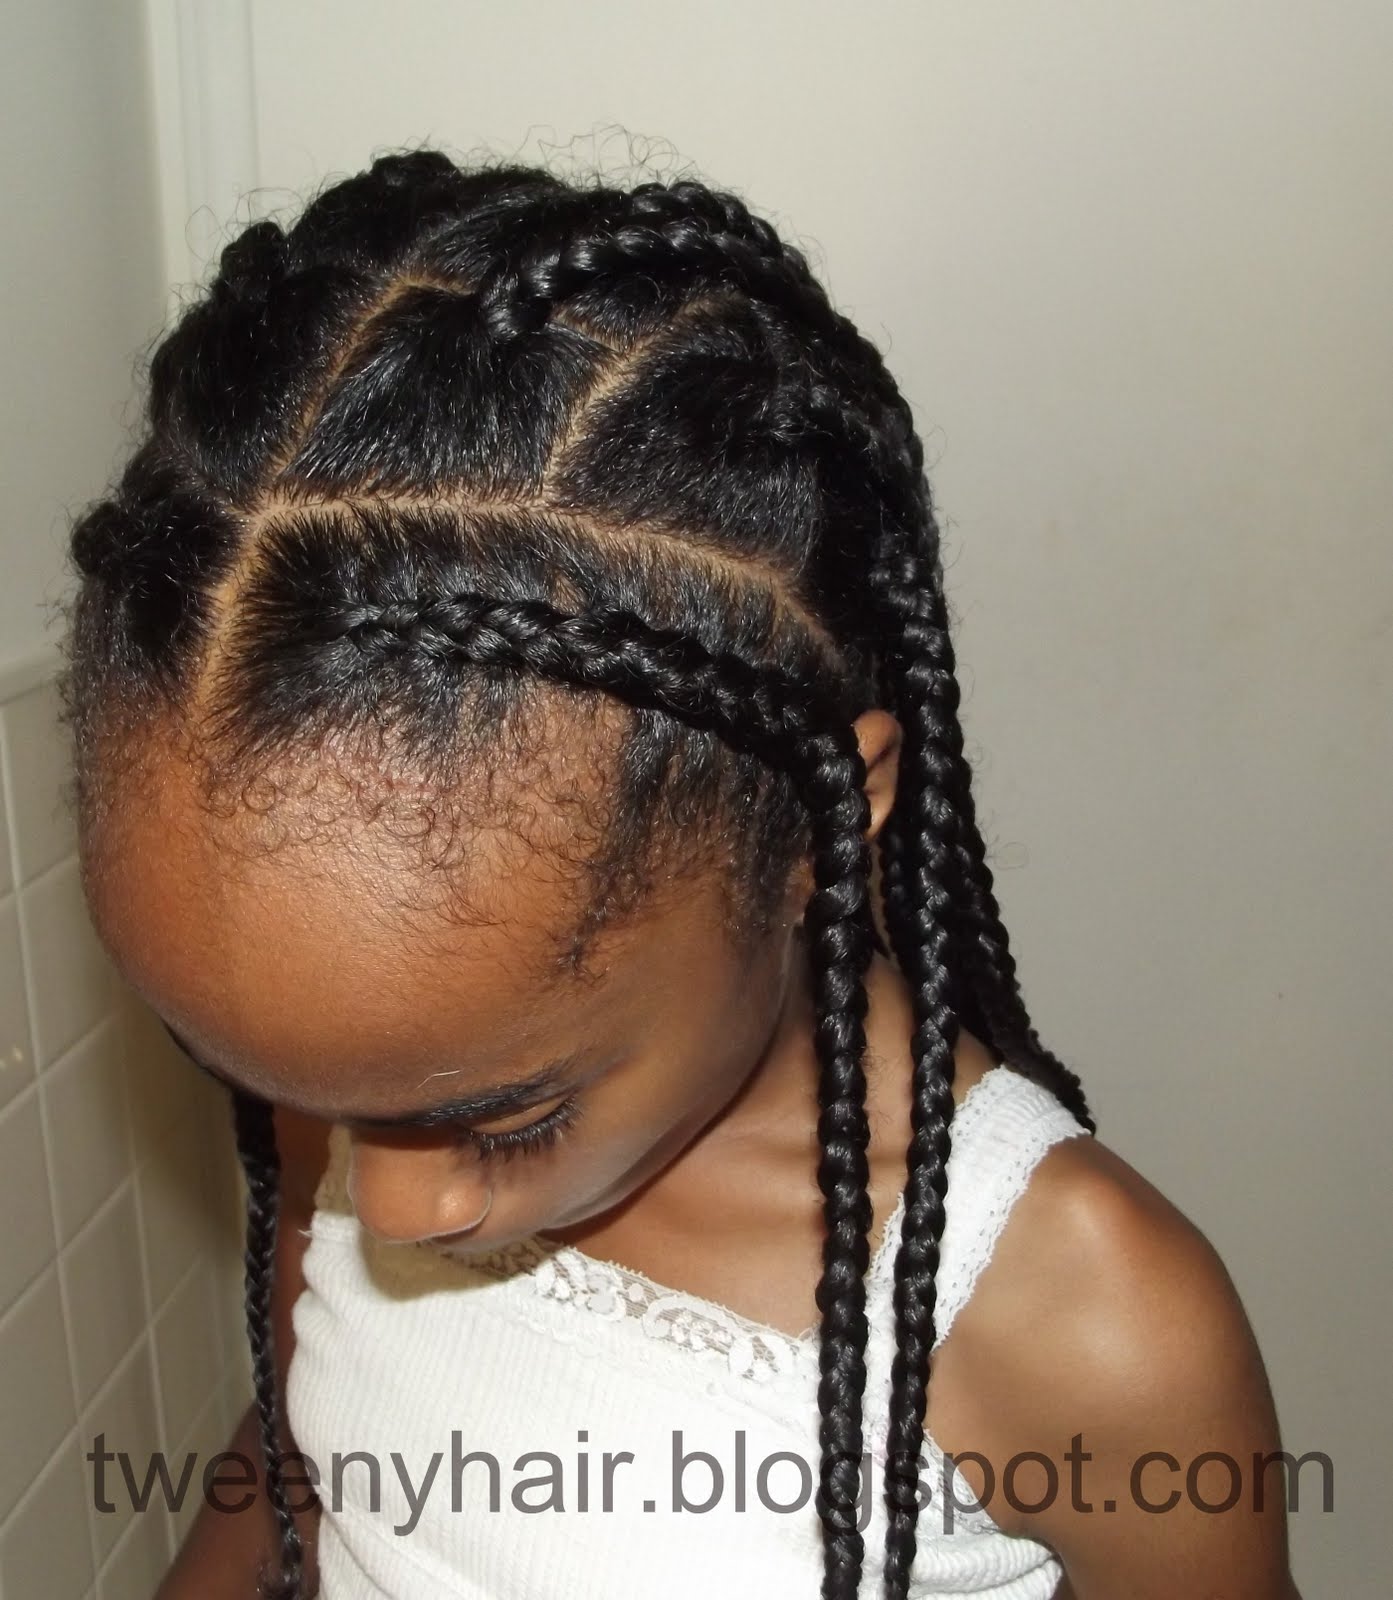 Braid Hairstyles For Black Girls With Natural Hair Simple Style - Cornrows and Box Braids